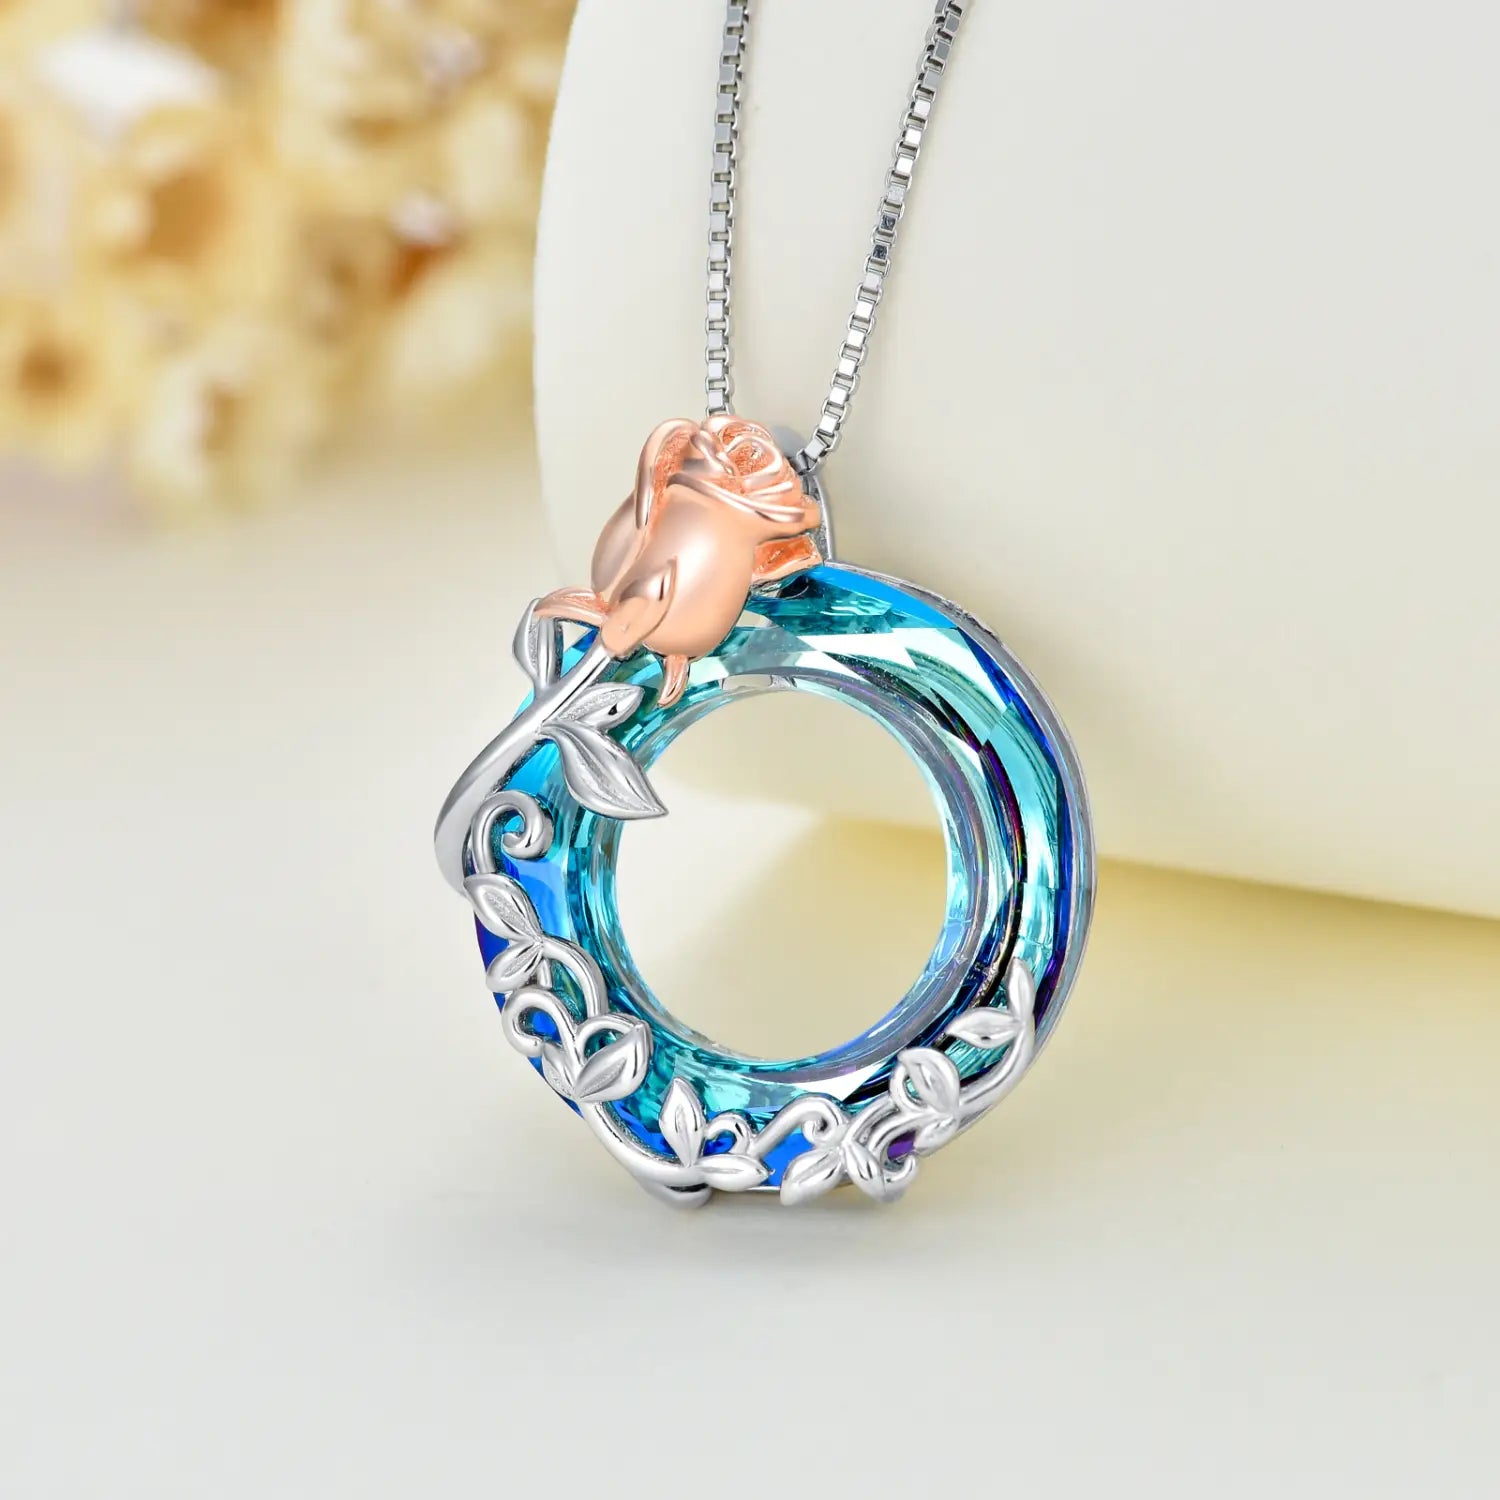 Crystal Flower Necklace for Women